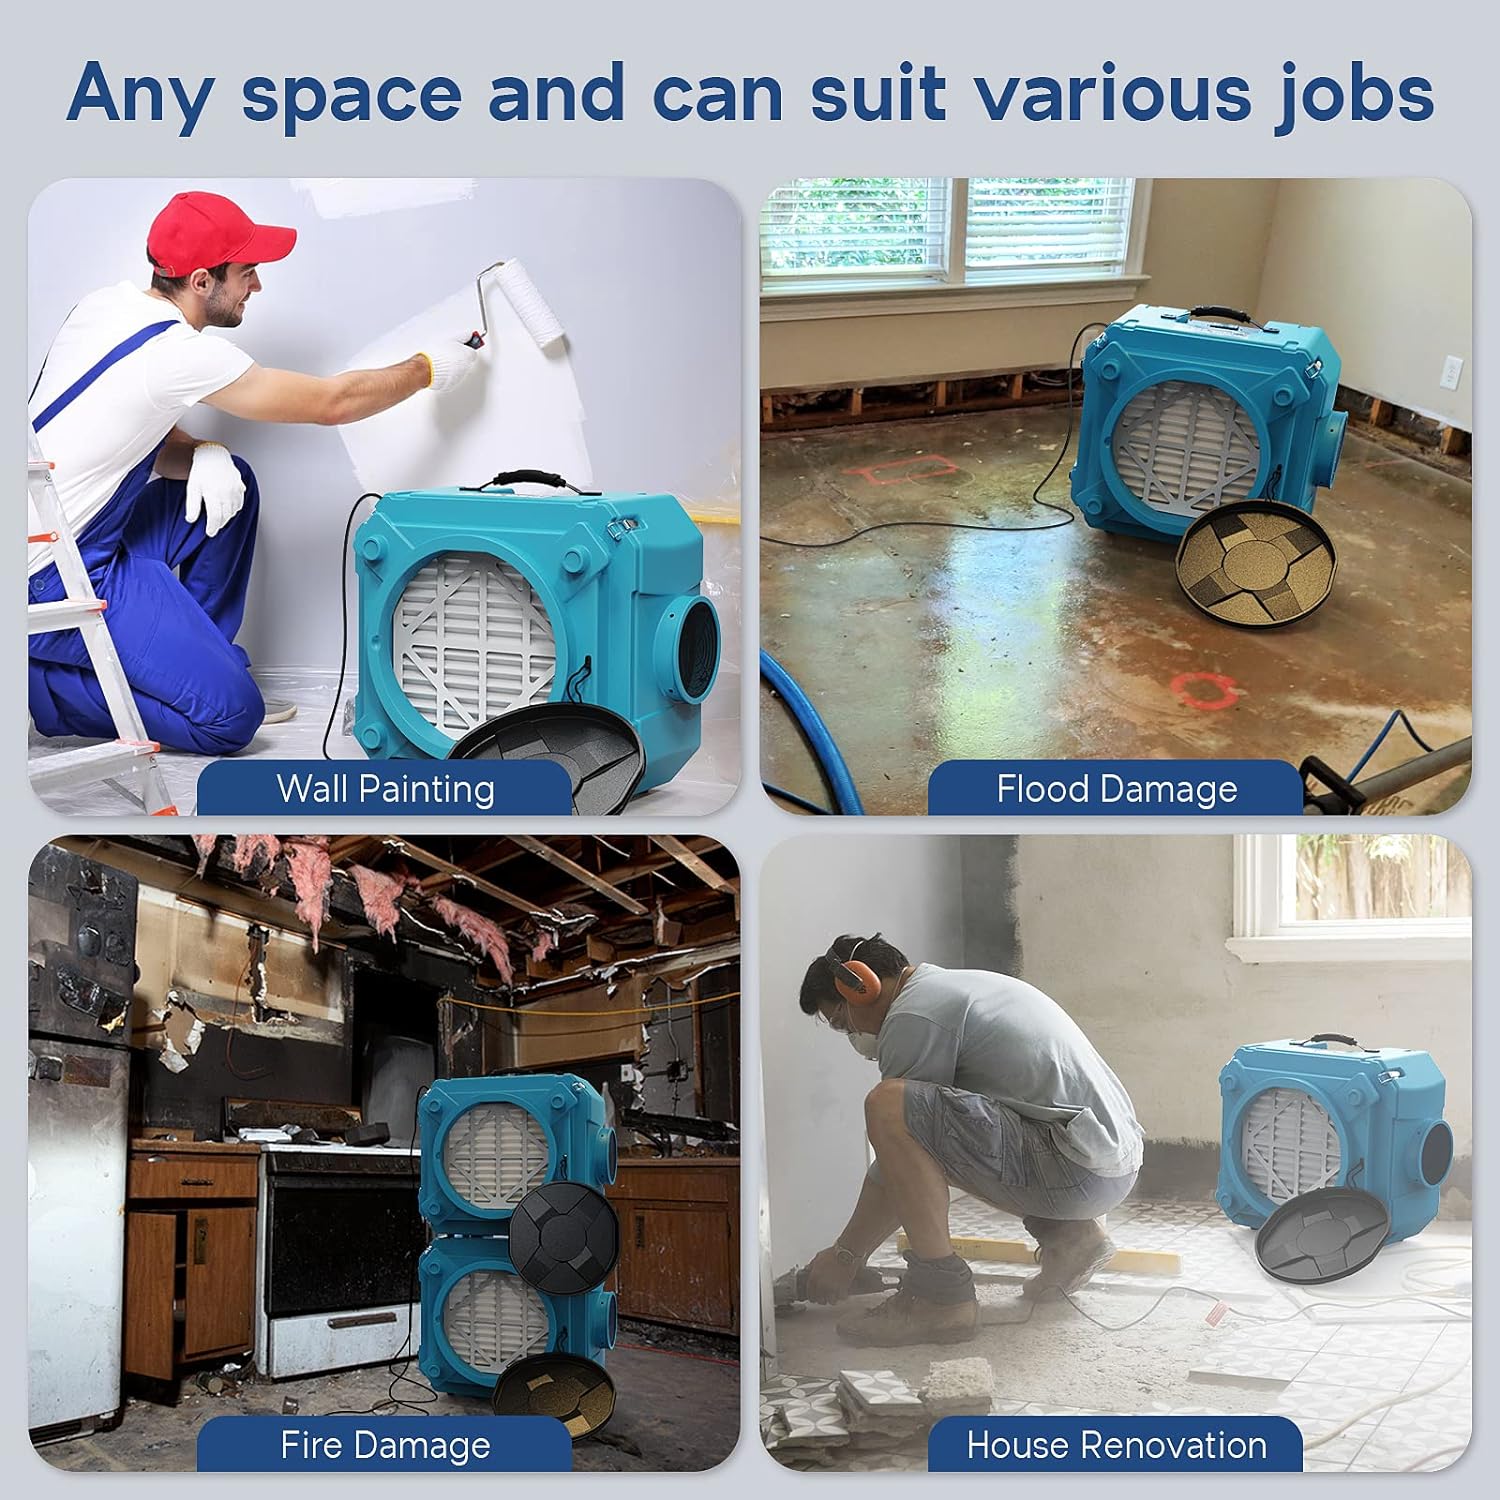 Alorair® Commercial Water Damage Restoration Equipment, 1 x Dehumidifier, 2 x Air Mover and 1 x Scrubber Combo Pack | Storm LGR Extreme & Zeus 900 & CleanShield HEPA 550